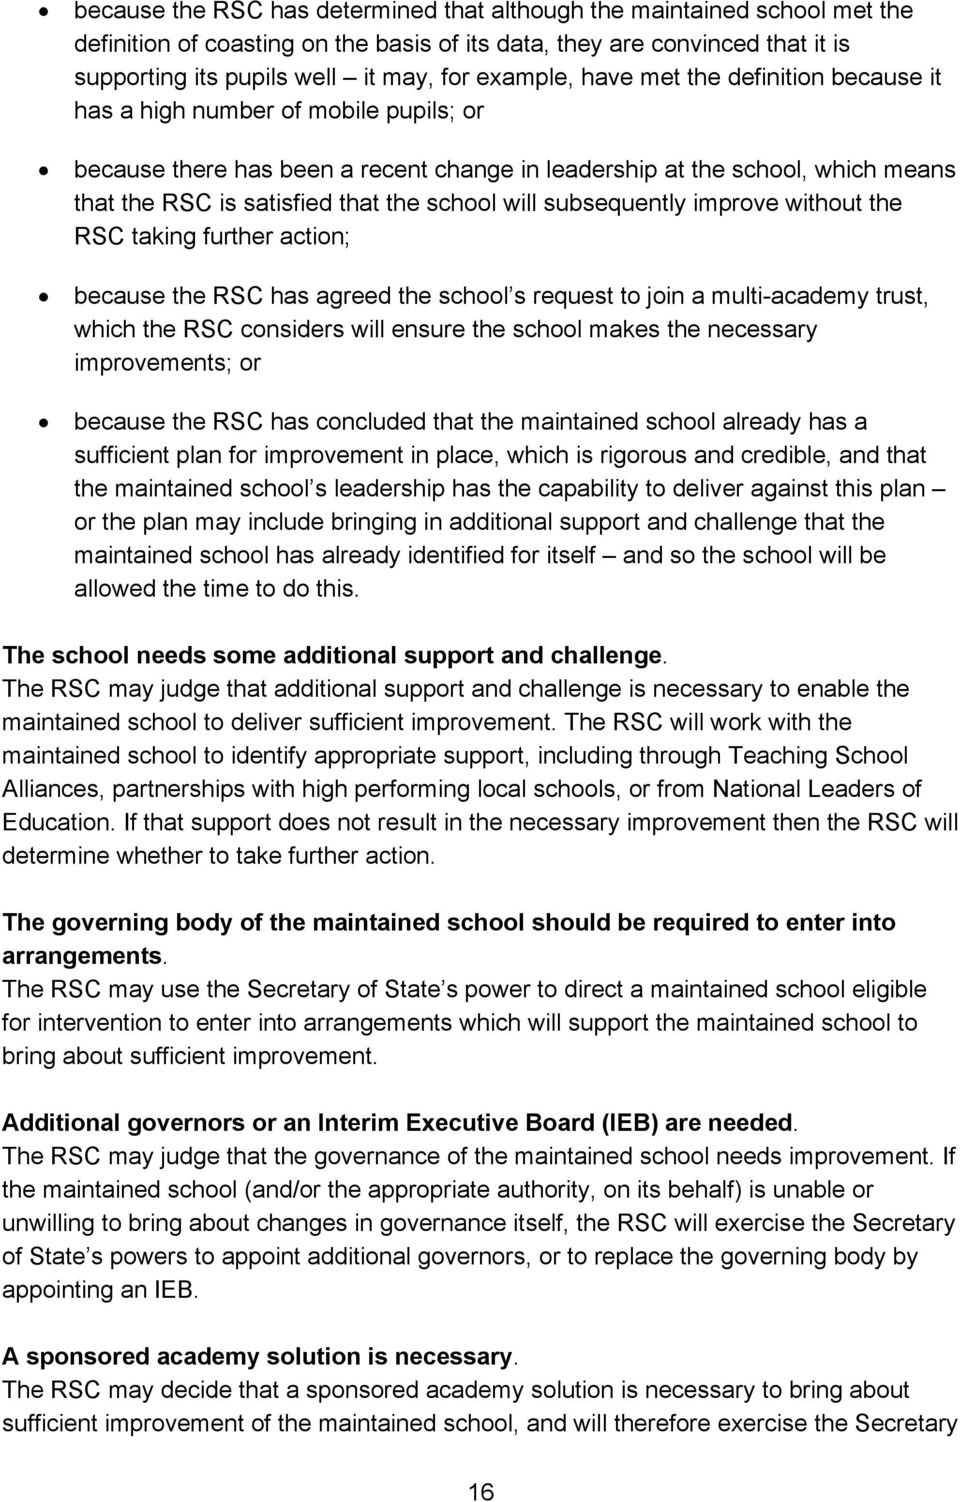 school will subsequently improve without the RSC taking further action; because the RSC has agreed the school s request to join a multi-academy trust, which the RSC considers will ensure the school